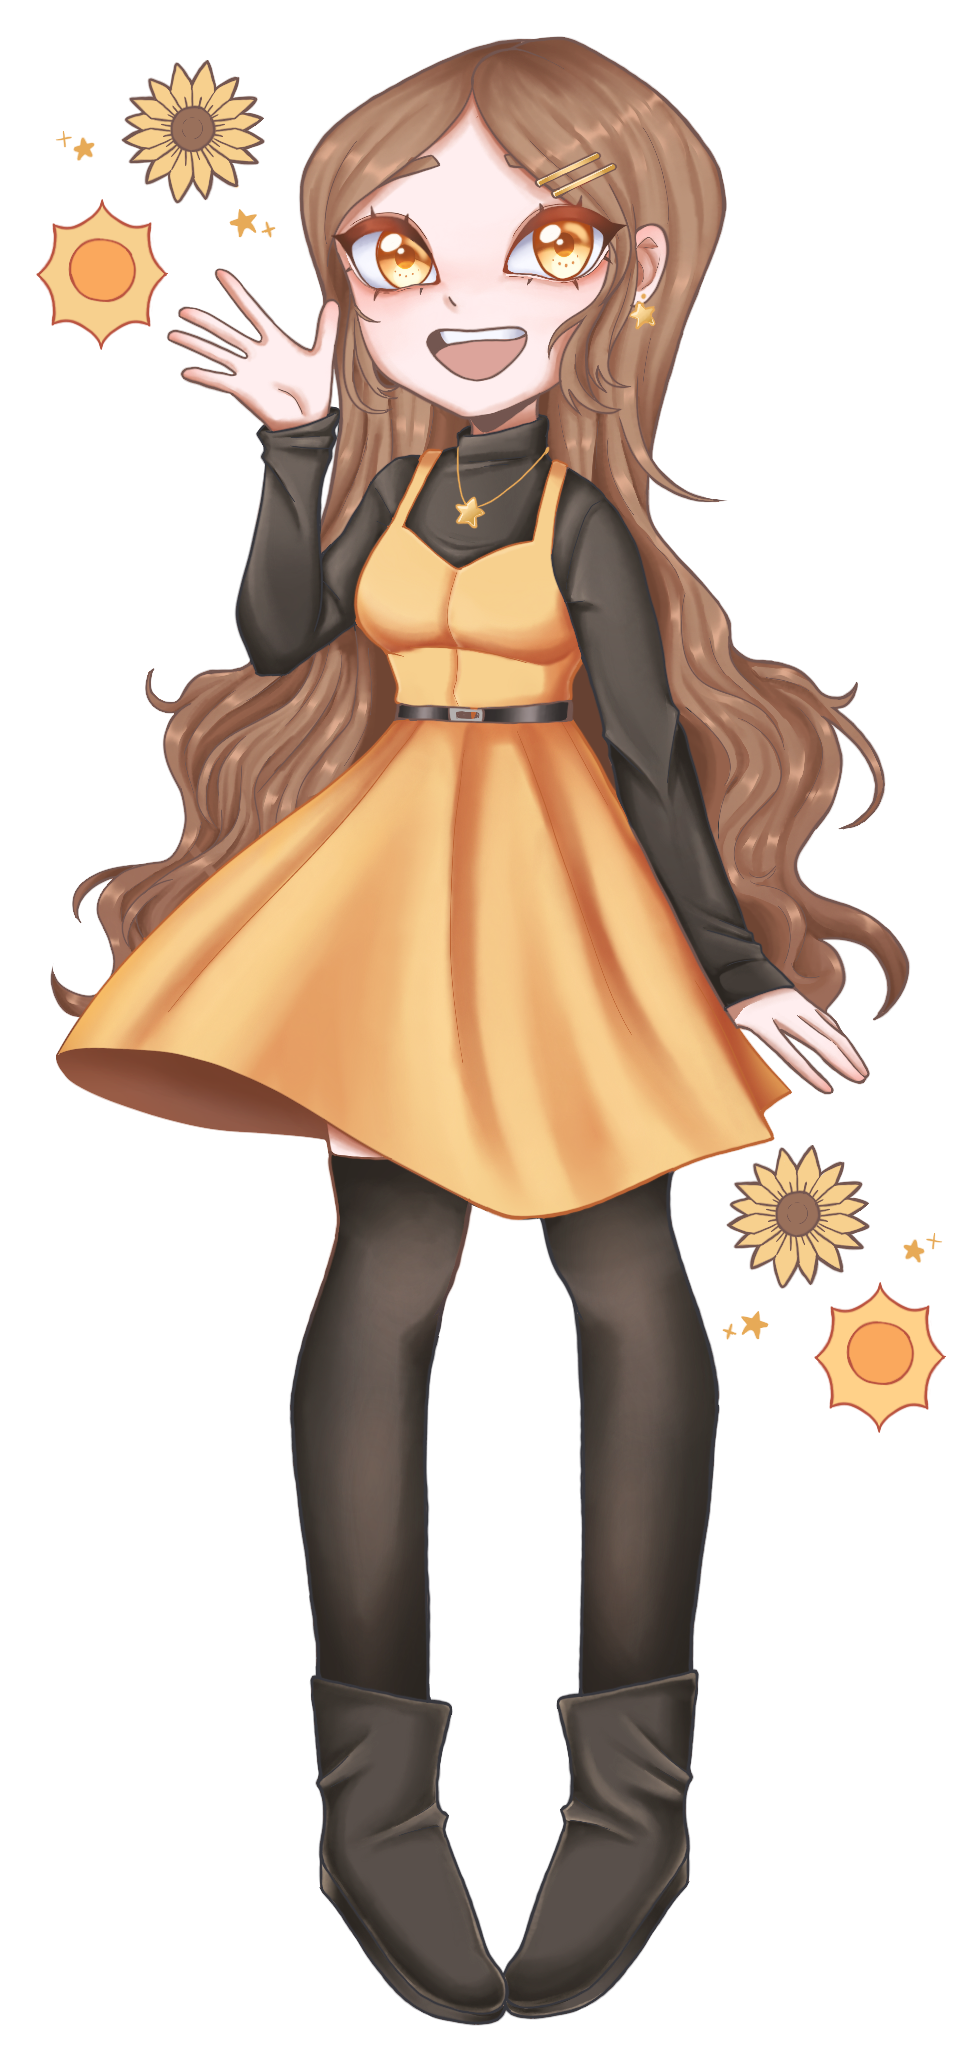 my oc sunny waving and smiling while surrounded by sunflowers, suns, and stars.